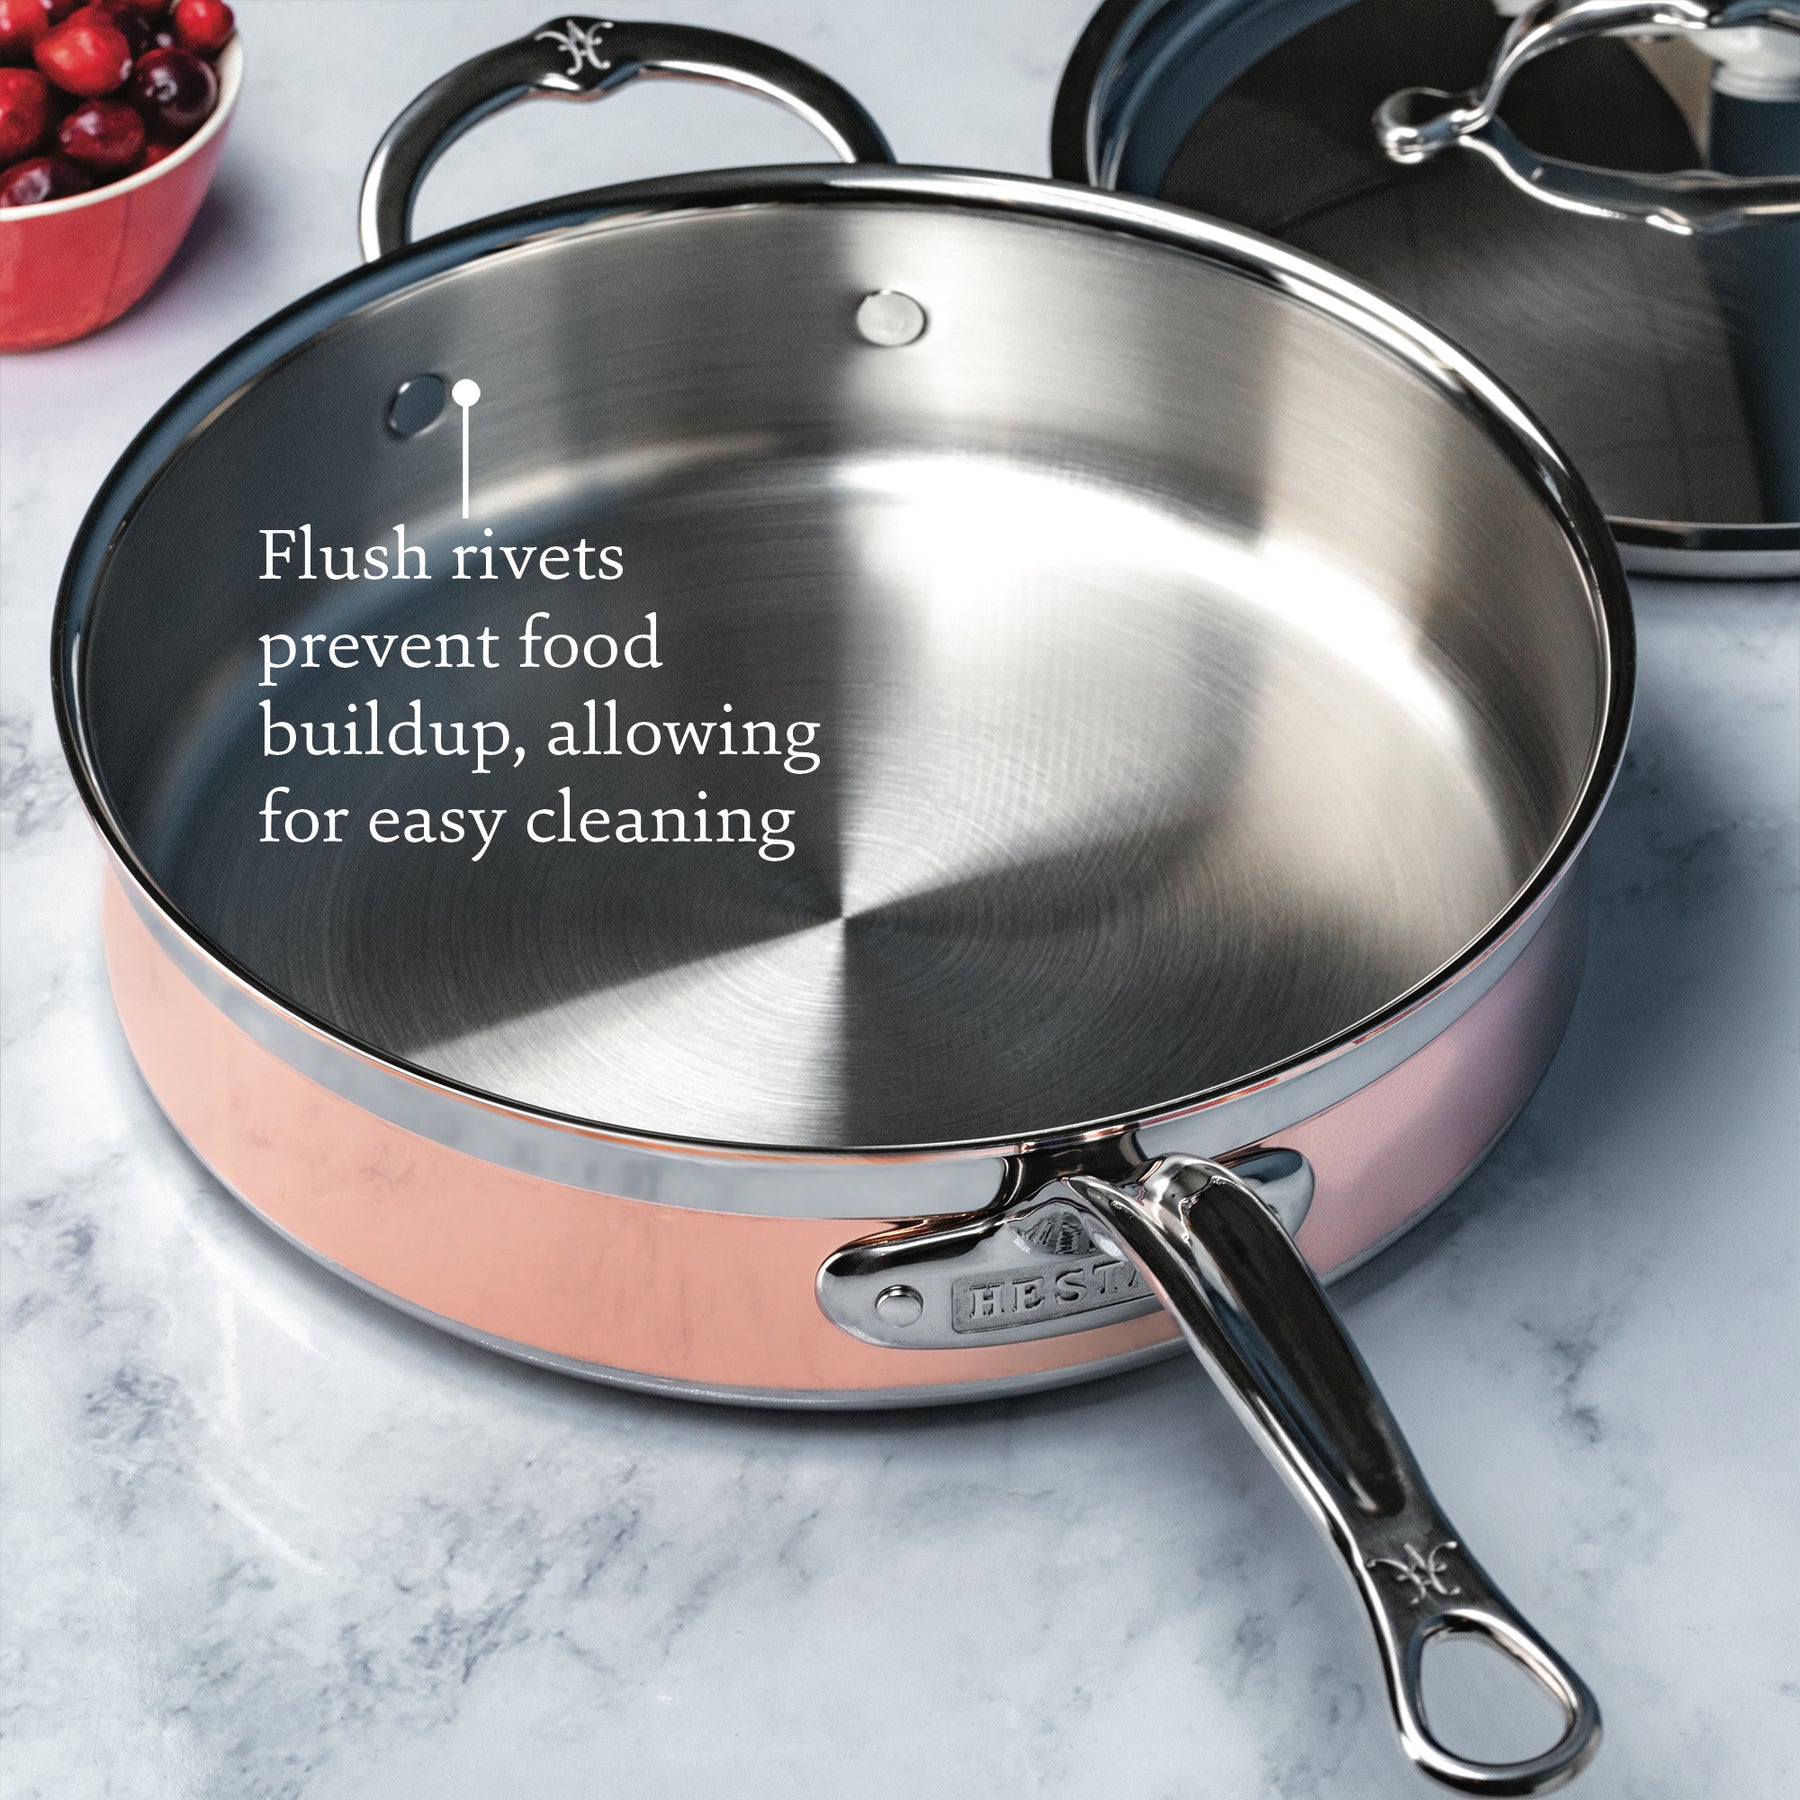 FRENCH CLASSIC STOCK POT 6QT – Things are Cooking